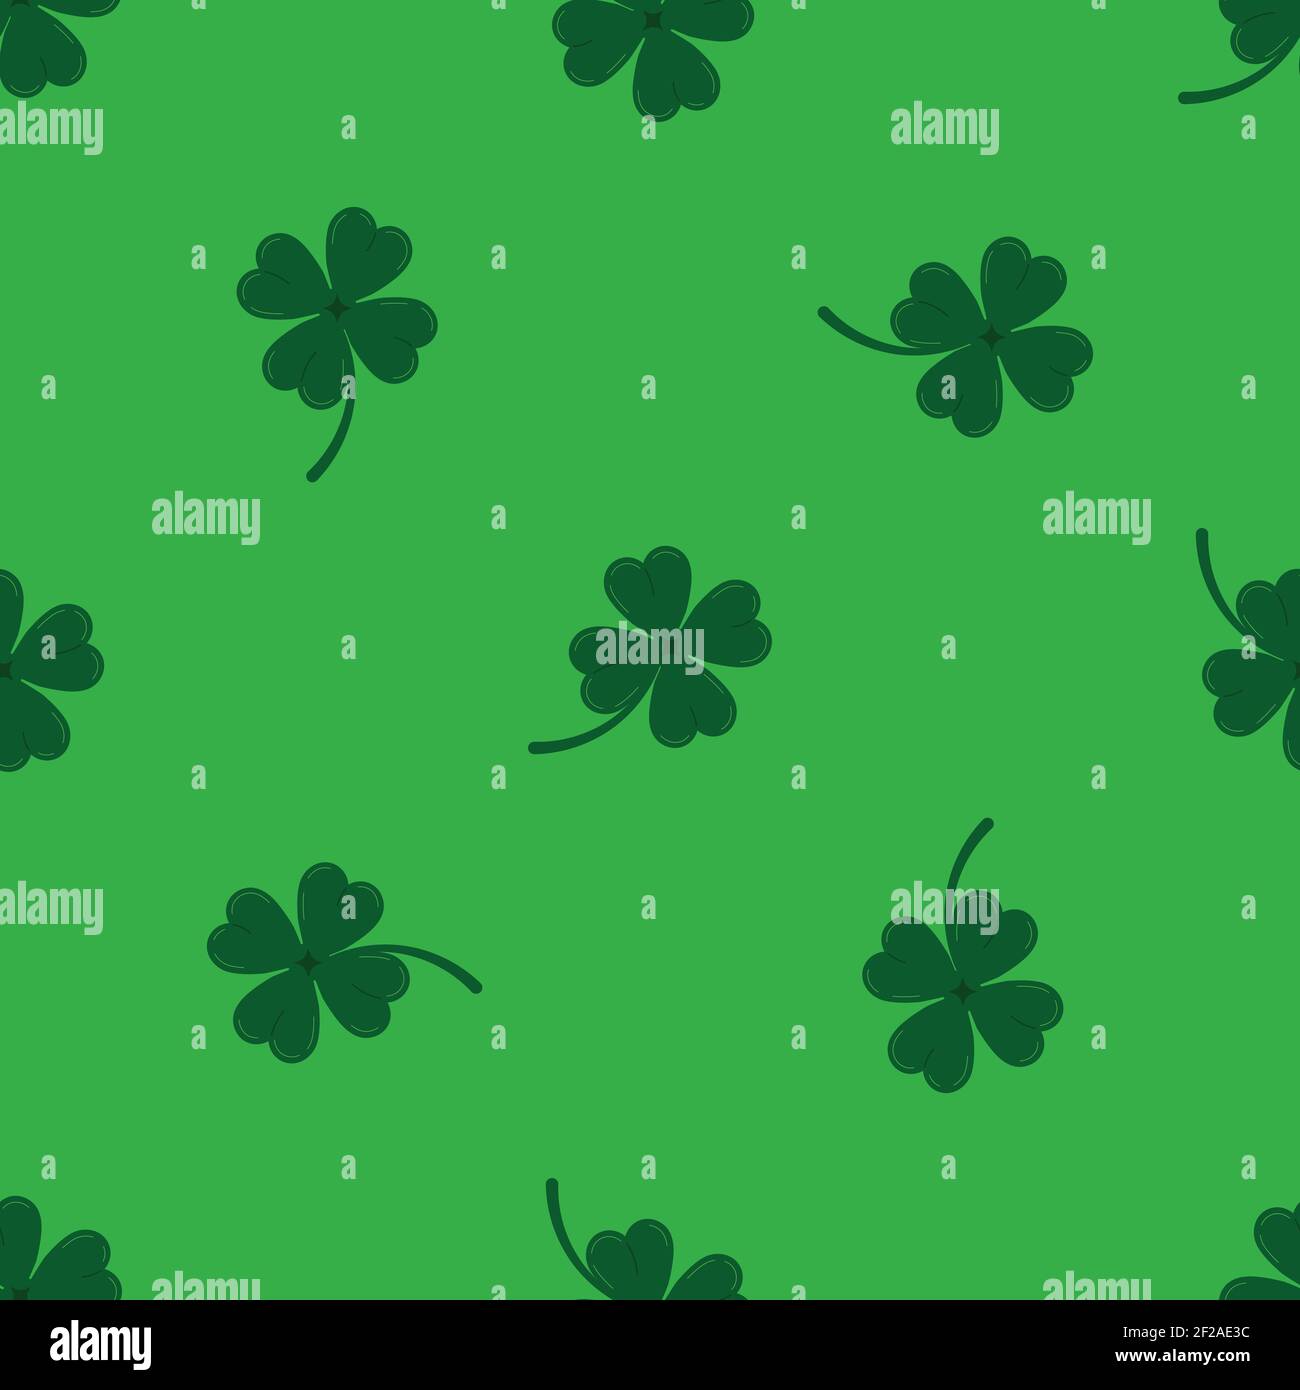 Clover leaves seamless pattern on green background. Stock Vector